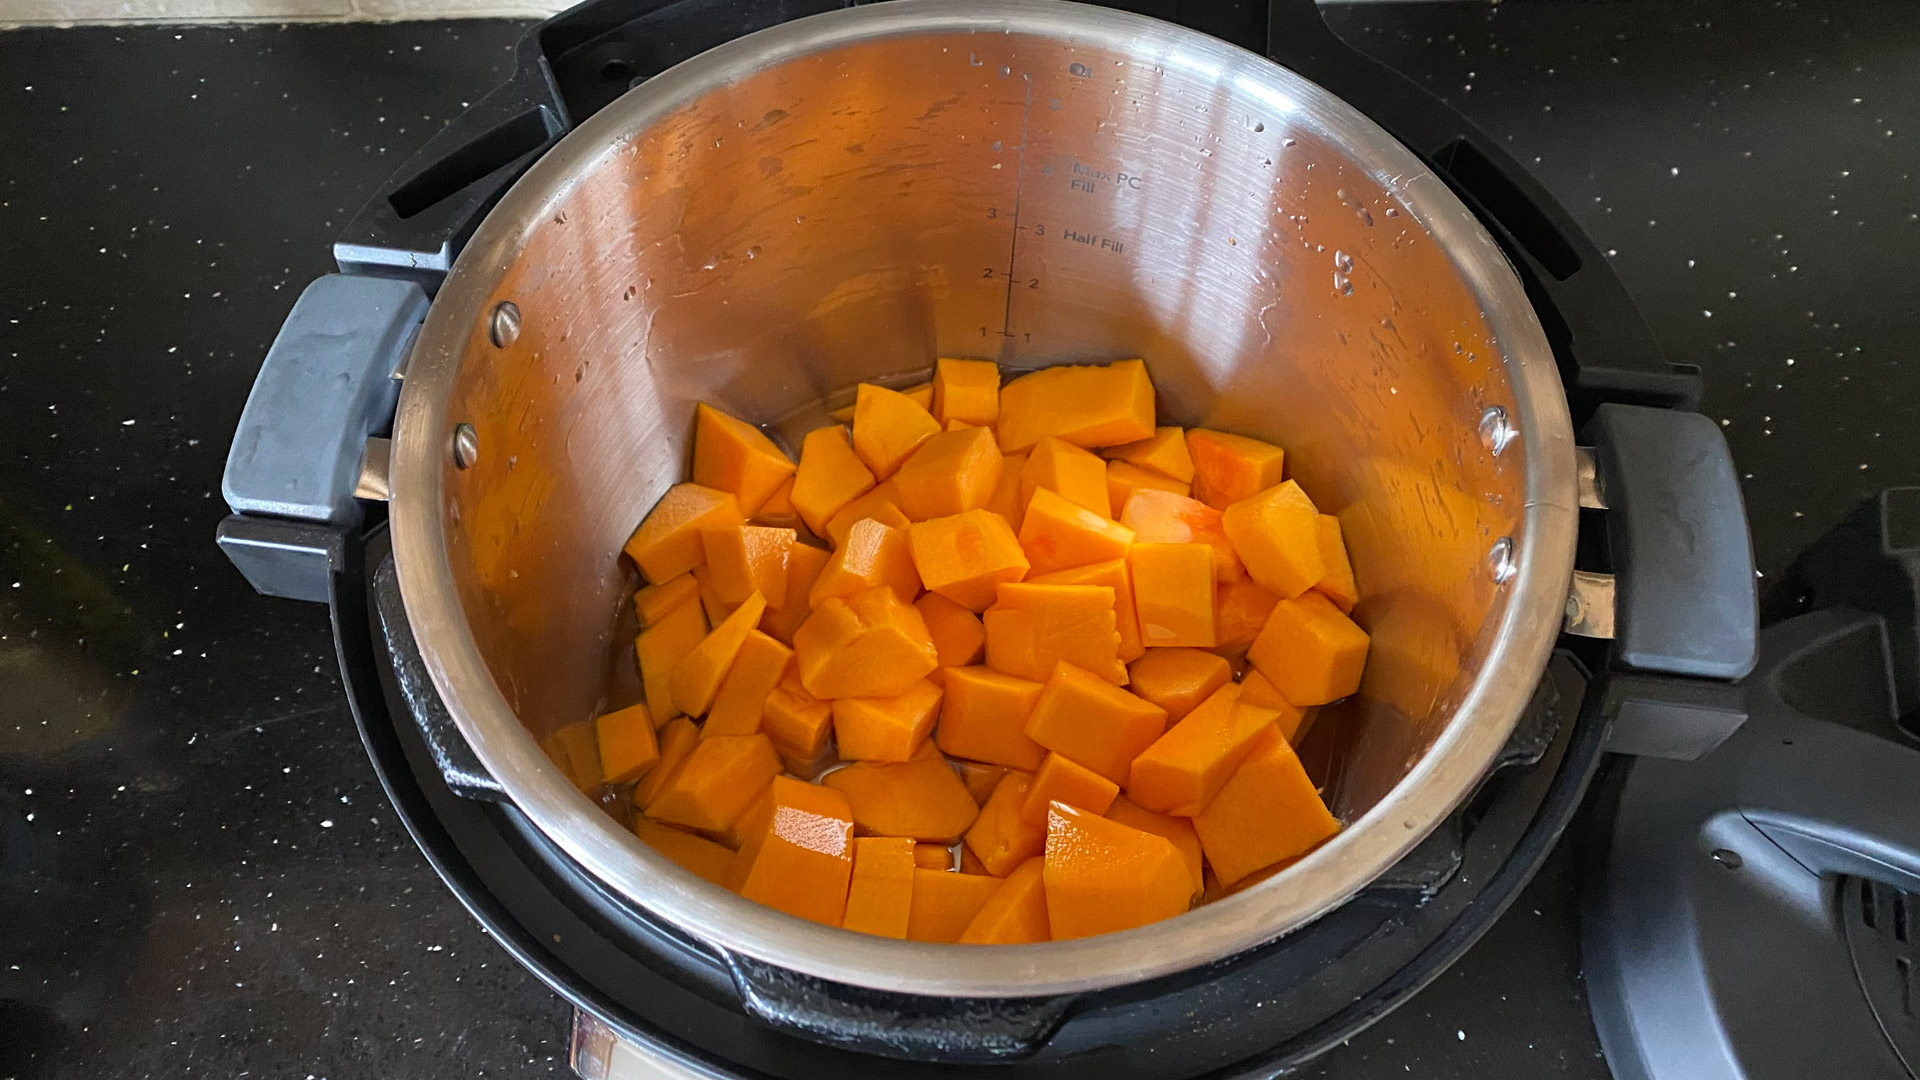 Butternut squash pressure cooked in 5 minutes in the Instant Pot Pro Plus Smart Multi-Cooker